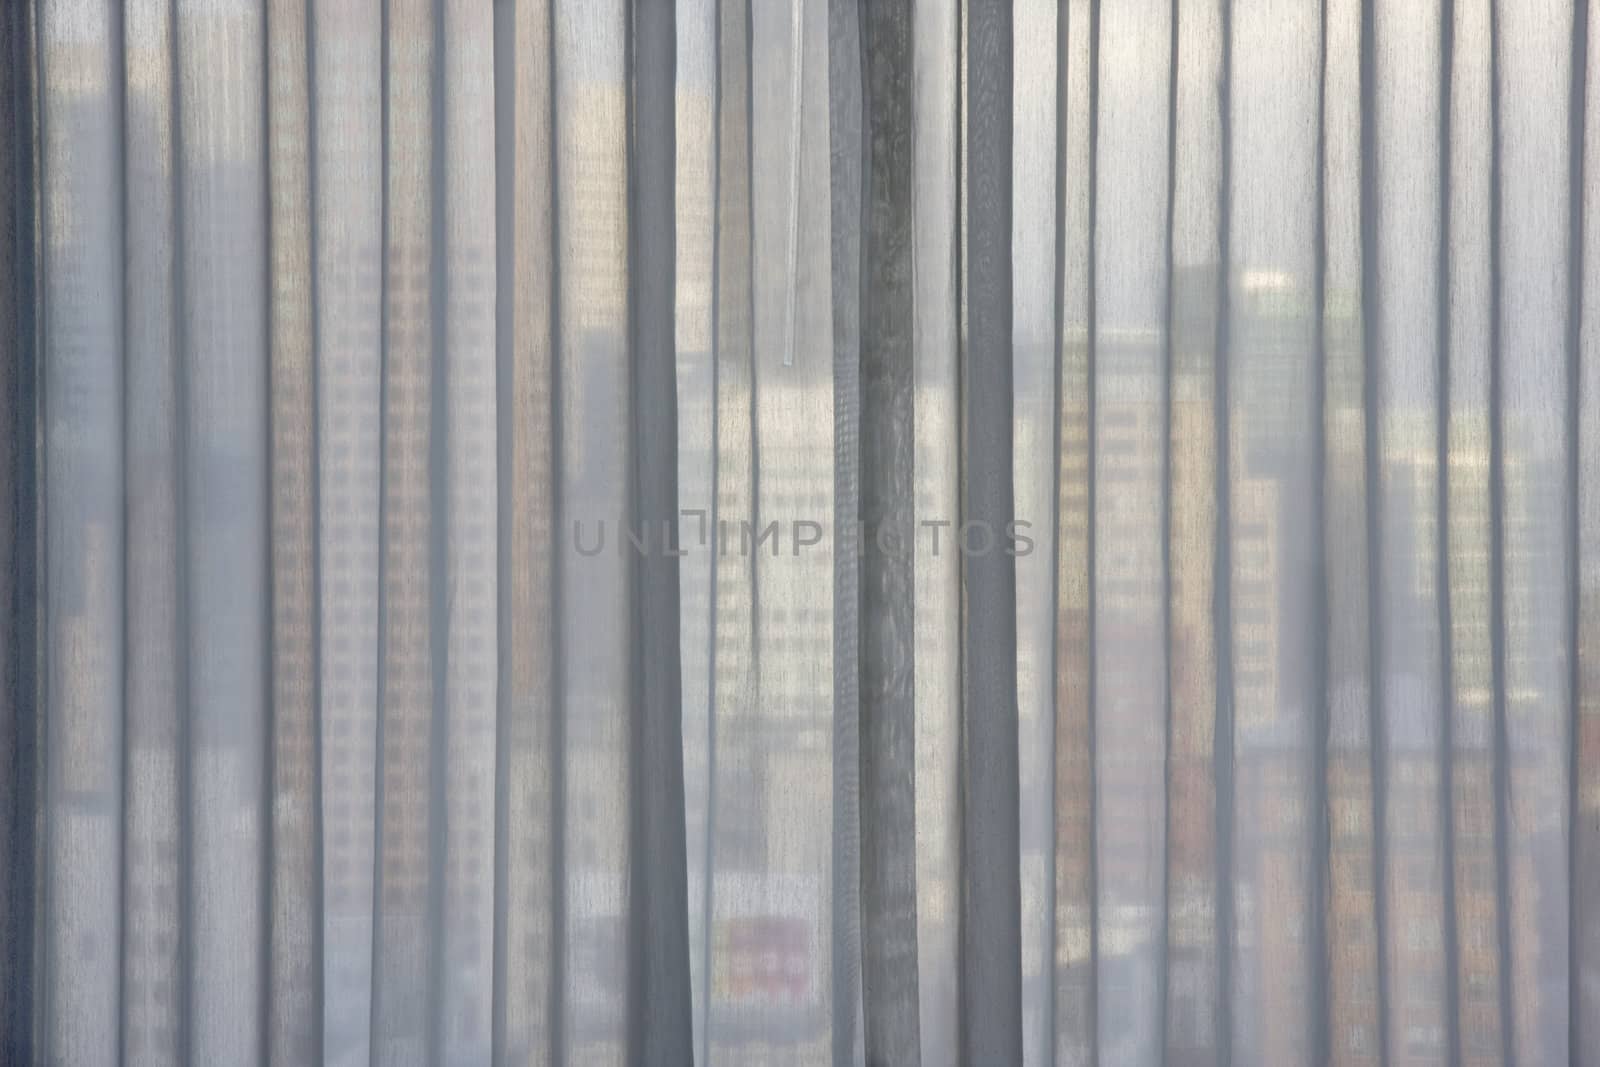 cityscape through window curtain by PixelsAway